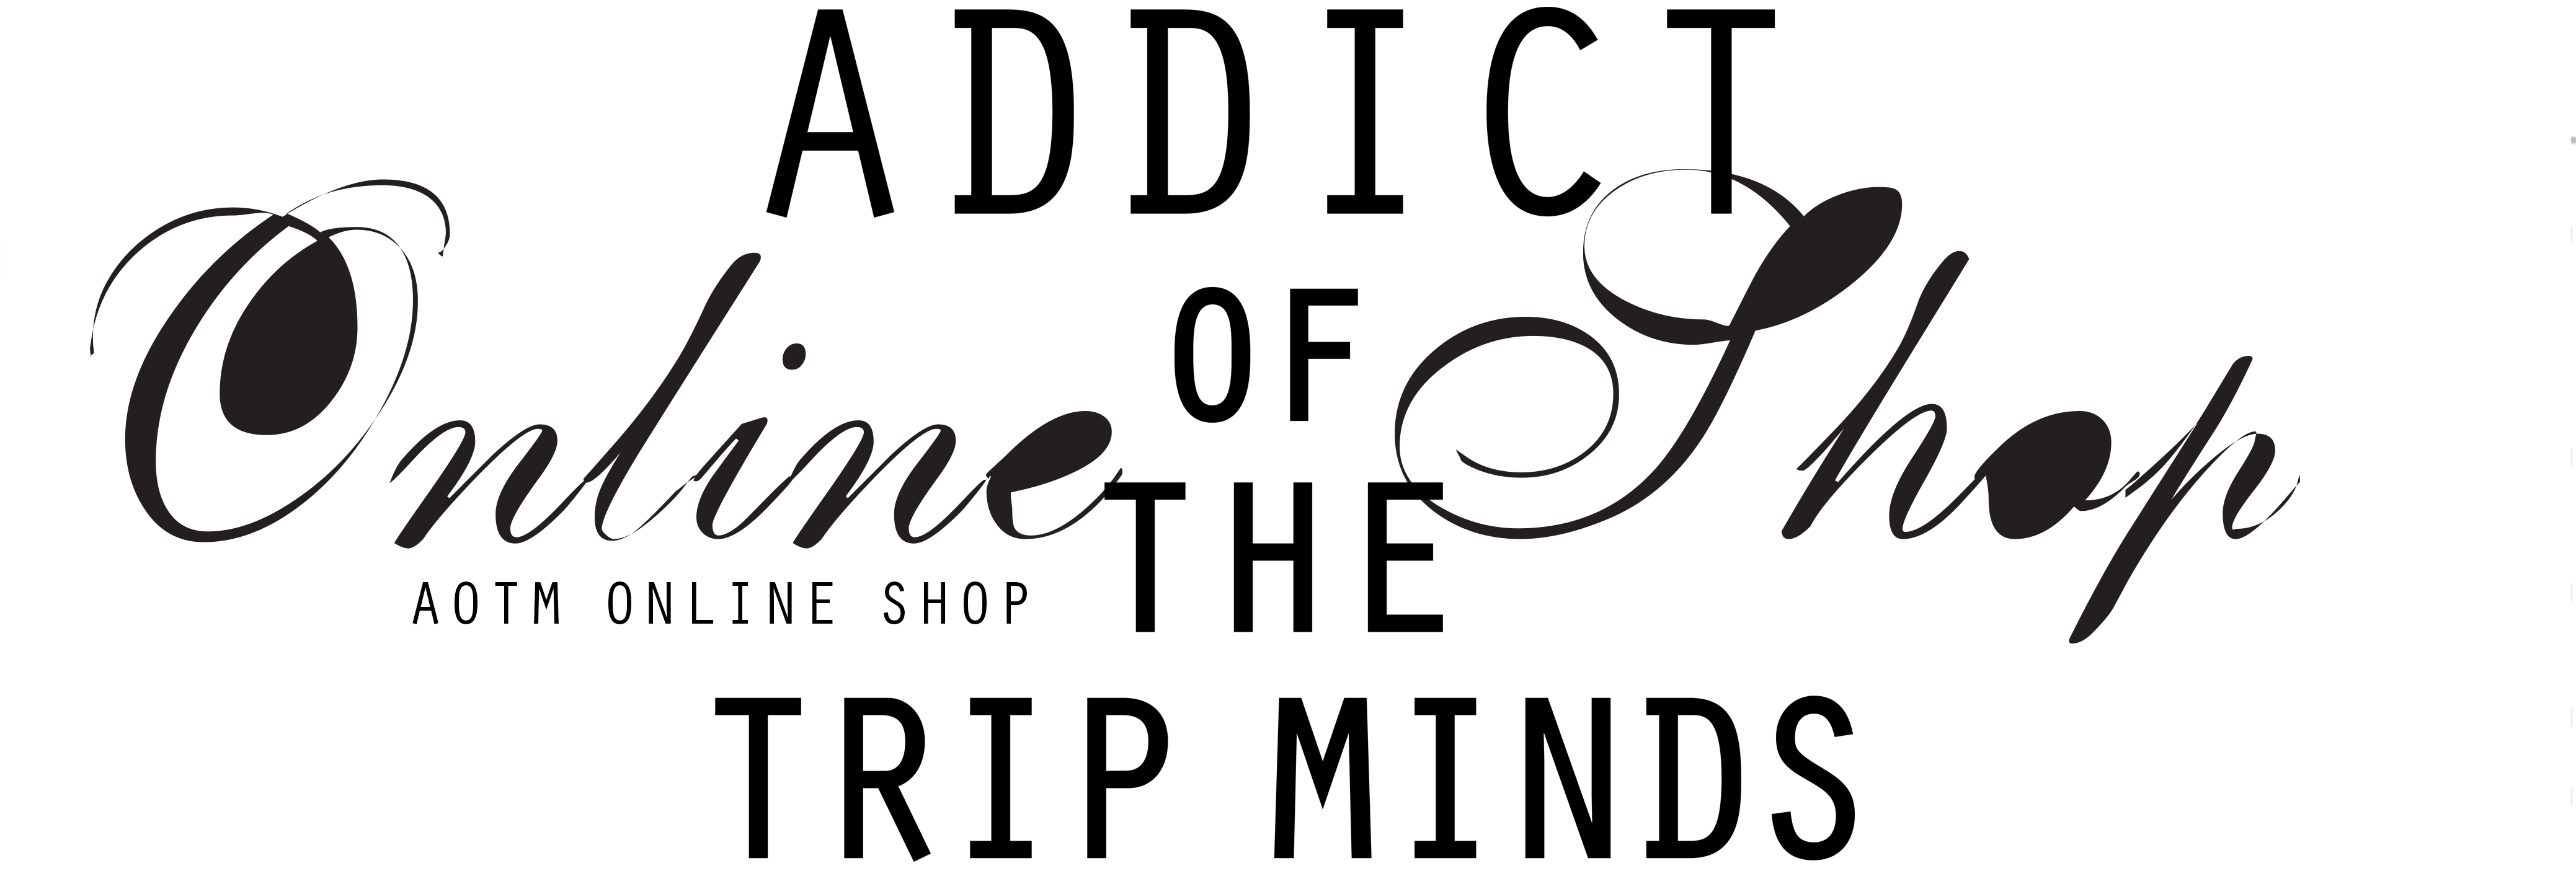 ADDICT OF THE TRIP MINDS Official Online Shop